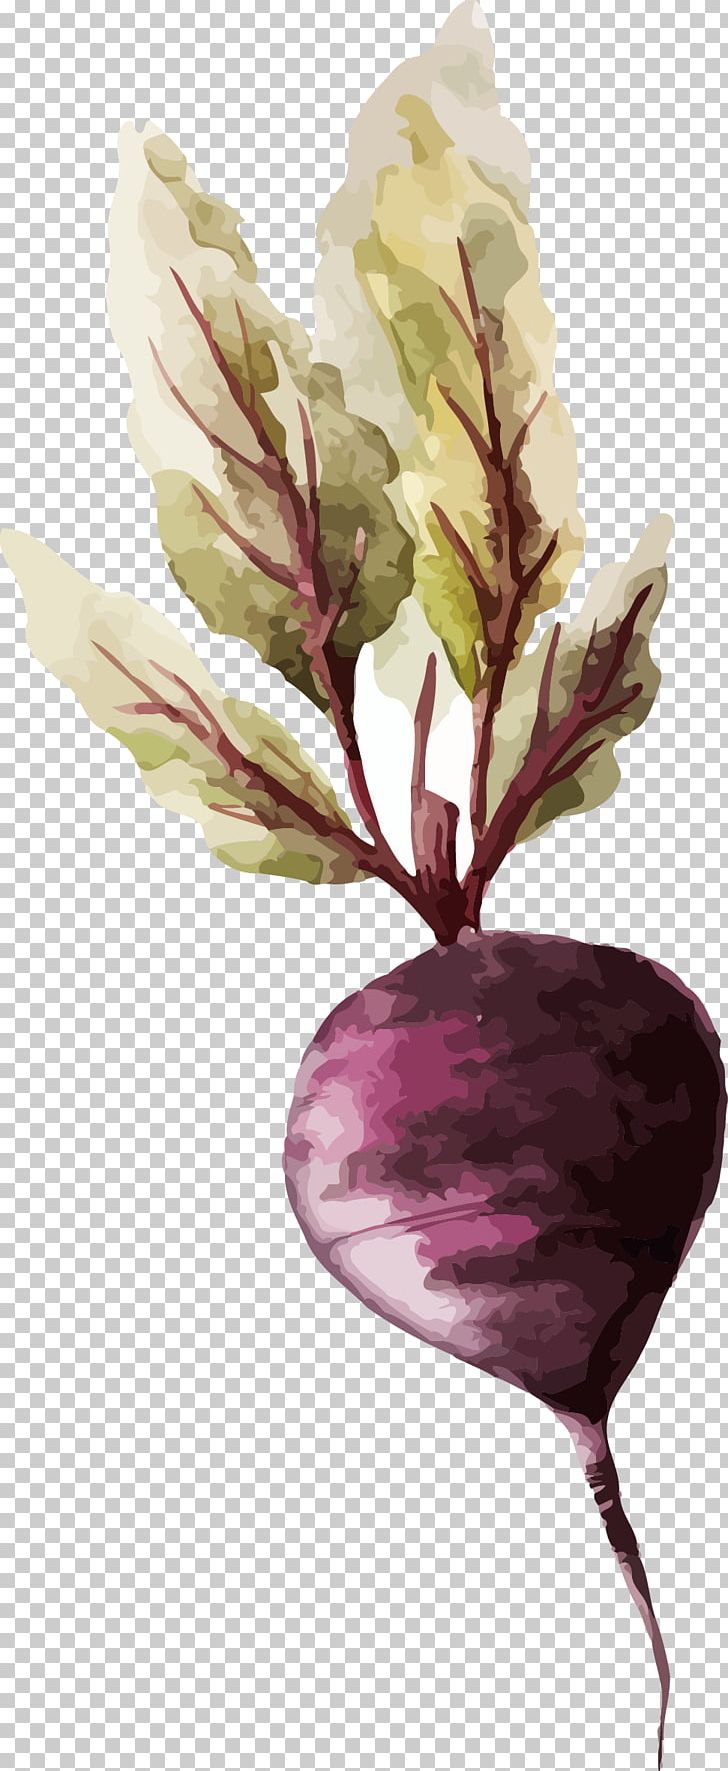 Watercolor Painting Vegetable Drawing Illustration PNG, Clipart, Beetroot, Branch, Bunch Of Carrots, Carrot, Carrot Free PNG Download